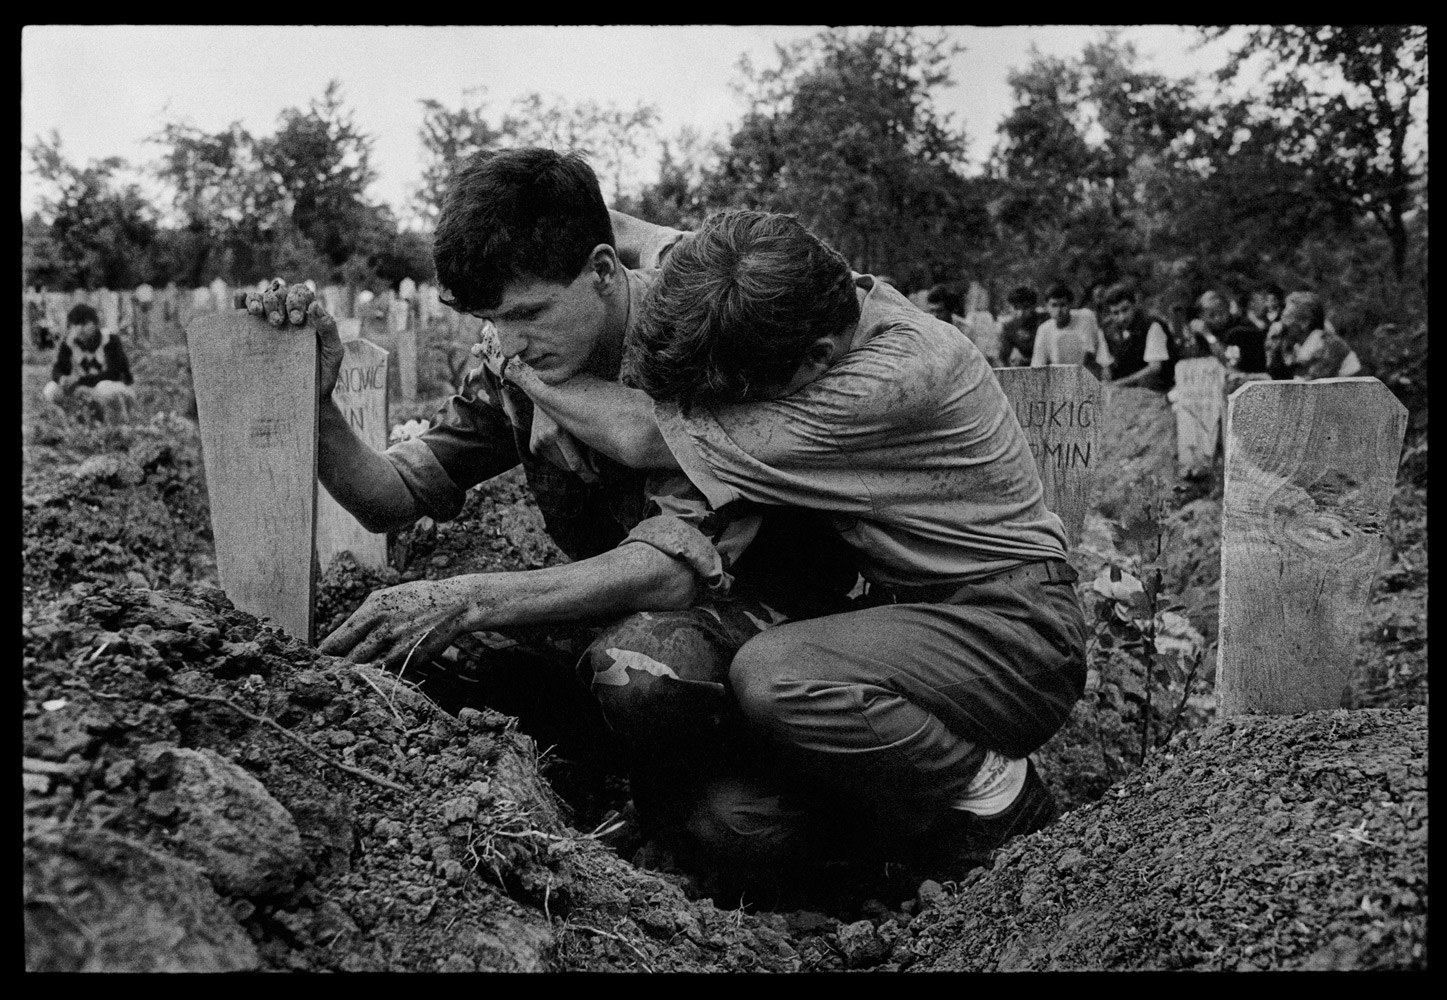 1993. Outside Brcko. In a small Bosnian village outside the town of Brcko, what had once been a park became a cemetery. All of the able, young men in the village were called upon to defend their families and homes from constant attacks by the Serbian army. Battlefield casualties were brought to the local mosque where the villagers would discover which of their relatives or neighbors had died that day.The young Bosnian soldier who guided me to the cemetery said that all of his friends were now buried there. At a funeral, two men collapsed with grief on top of the grave.